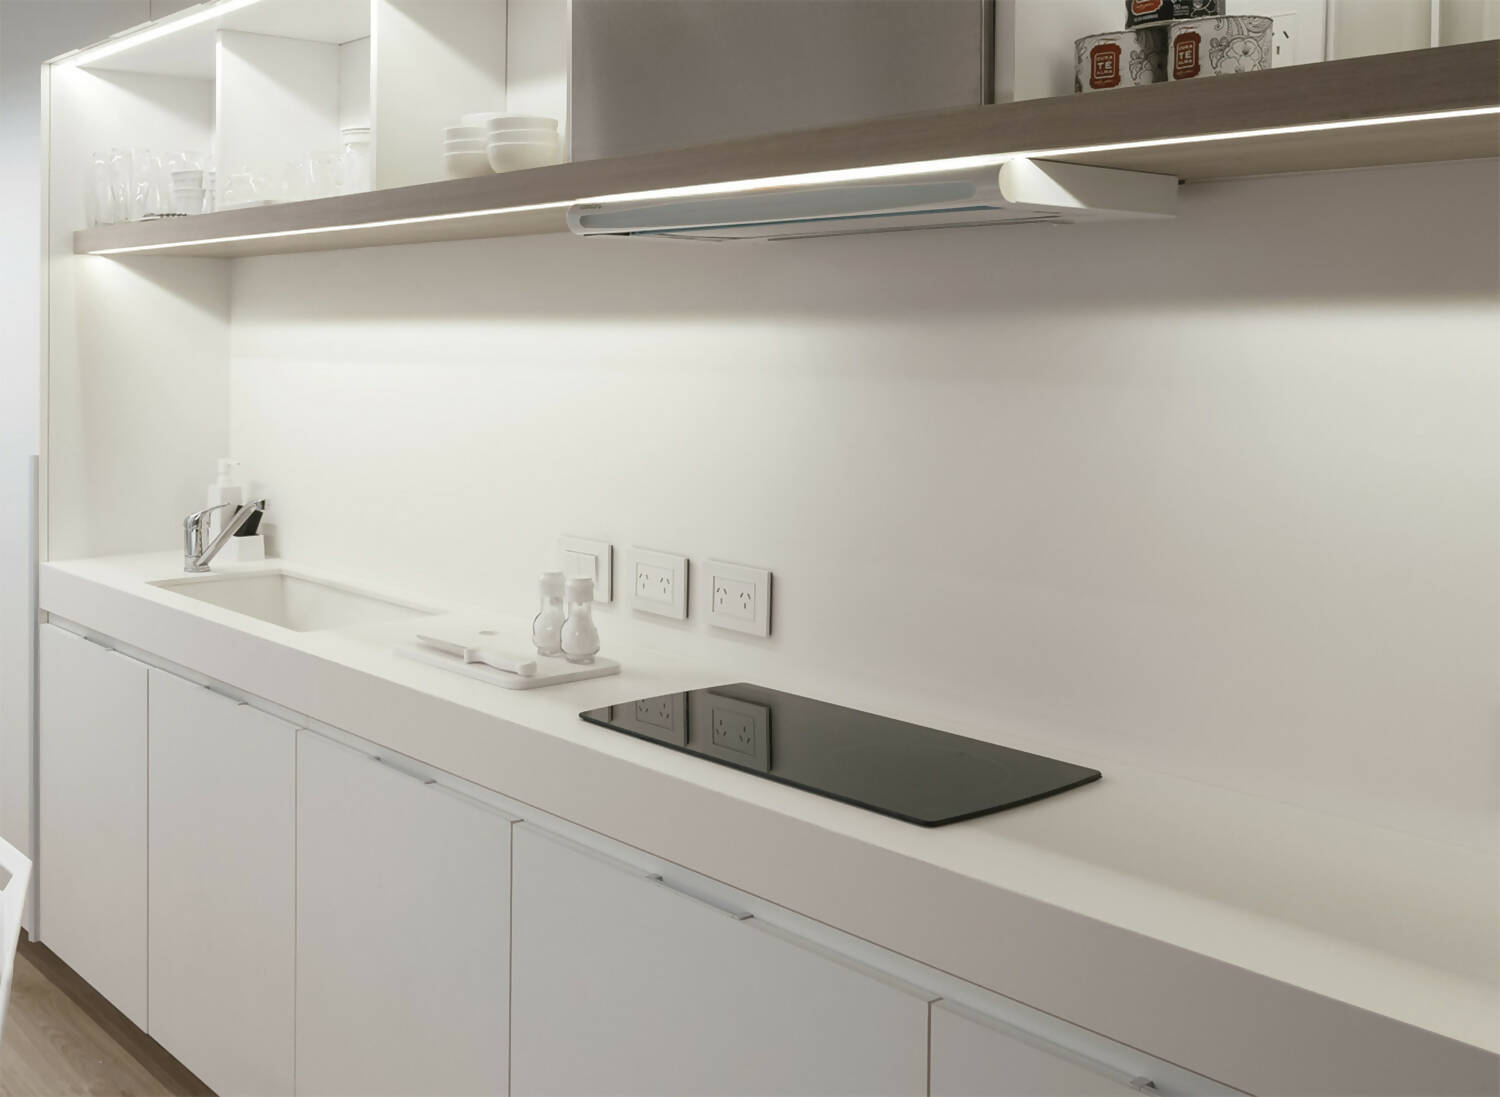 ARCTIC WHITE SATIN SINK,Stone Sink,NEOLITH,www.work-tops.com